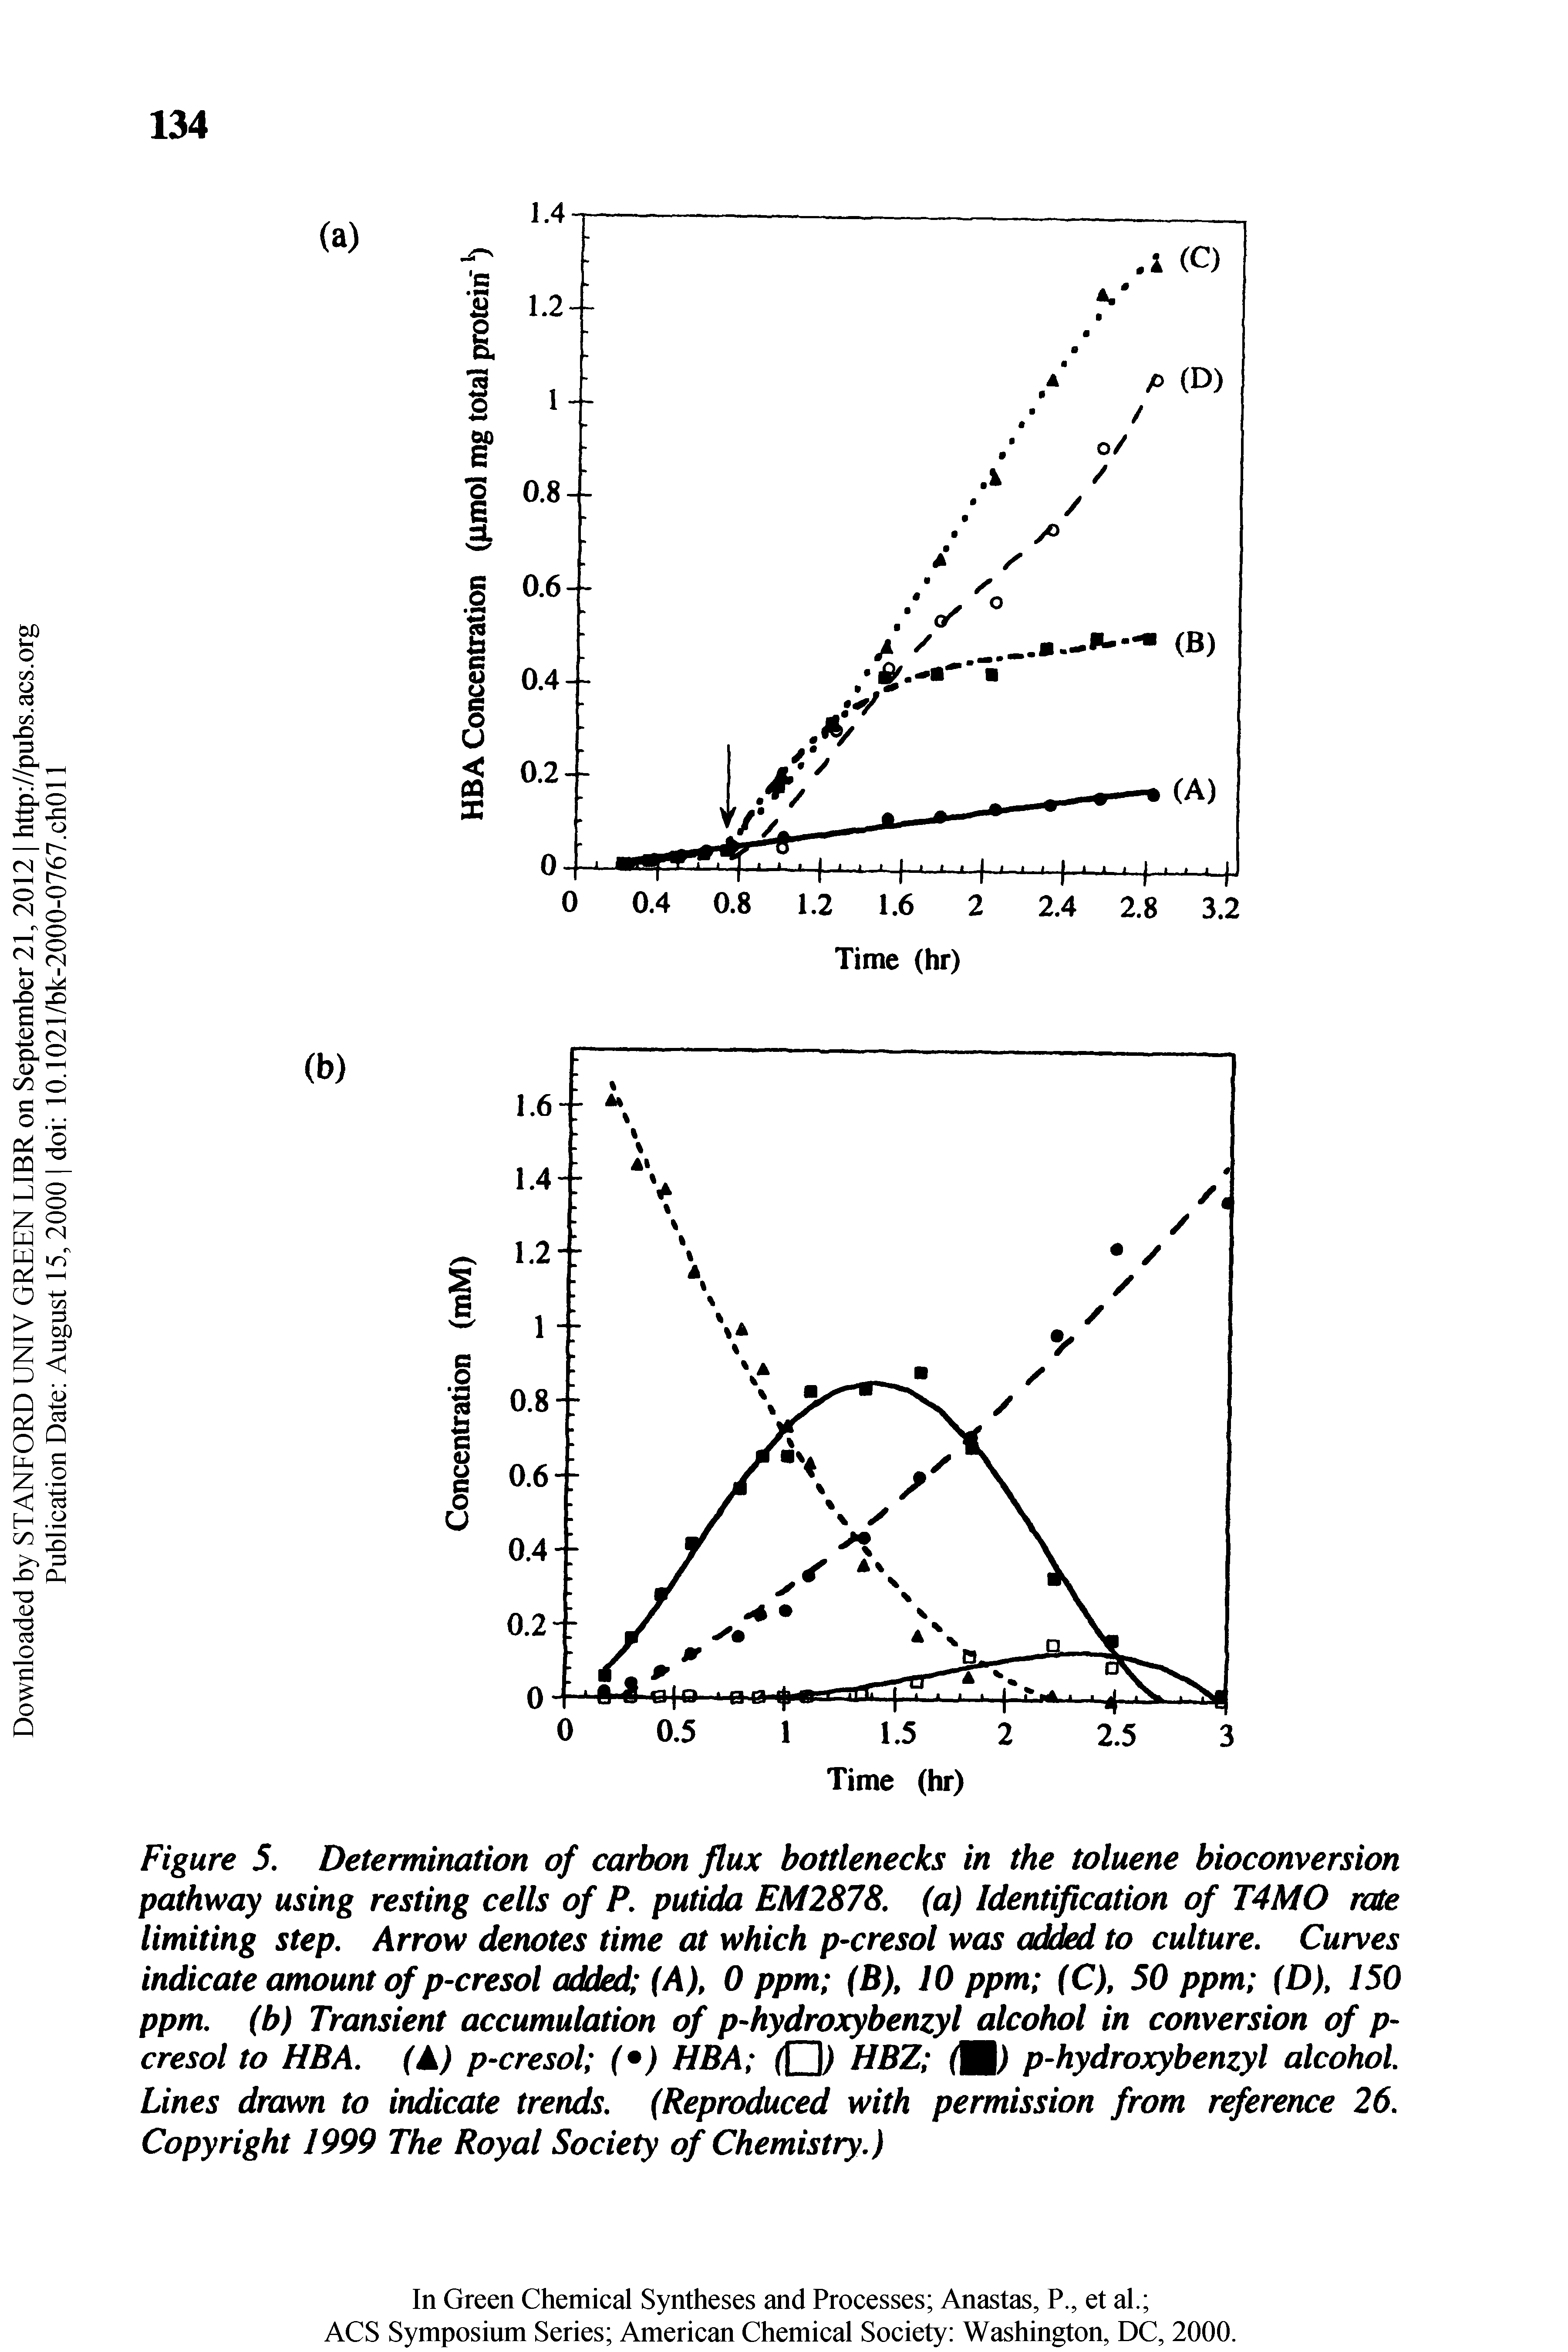 Figure 5. Determination of carbon flux bottlenecks in the toluene bioconversion pathway using resting cells of P. putida EM2878, (a) Identification of T4MO rate limiting step. Arrow denotes time at which p-cresol was added to culture. Curves indicate amount of p-cresol added (A), 0 ppm (B), 10 ppm (C), 50 ppm (D), 150 ppm. (b) Transient accumulation of p-hydroxybenzyl alcohol in conversion of p-cresol to HBA. (k) p-cresol ( ) HBA HBZ IWi) p-hydroxybenzyl alcohol. Lines drawn to indicate trends. (Reproduced with permission from reference 26. Copyright 1999 The Royal Society of Chemistry.)...